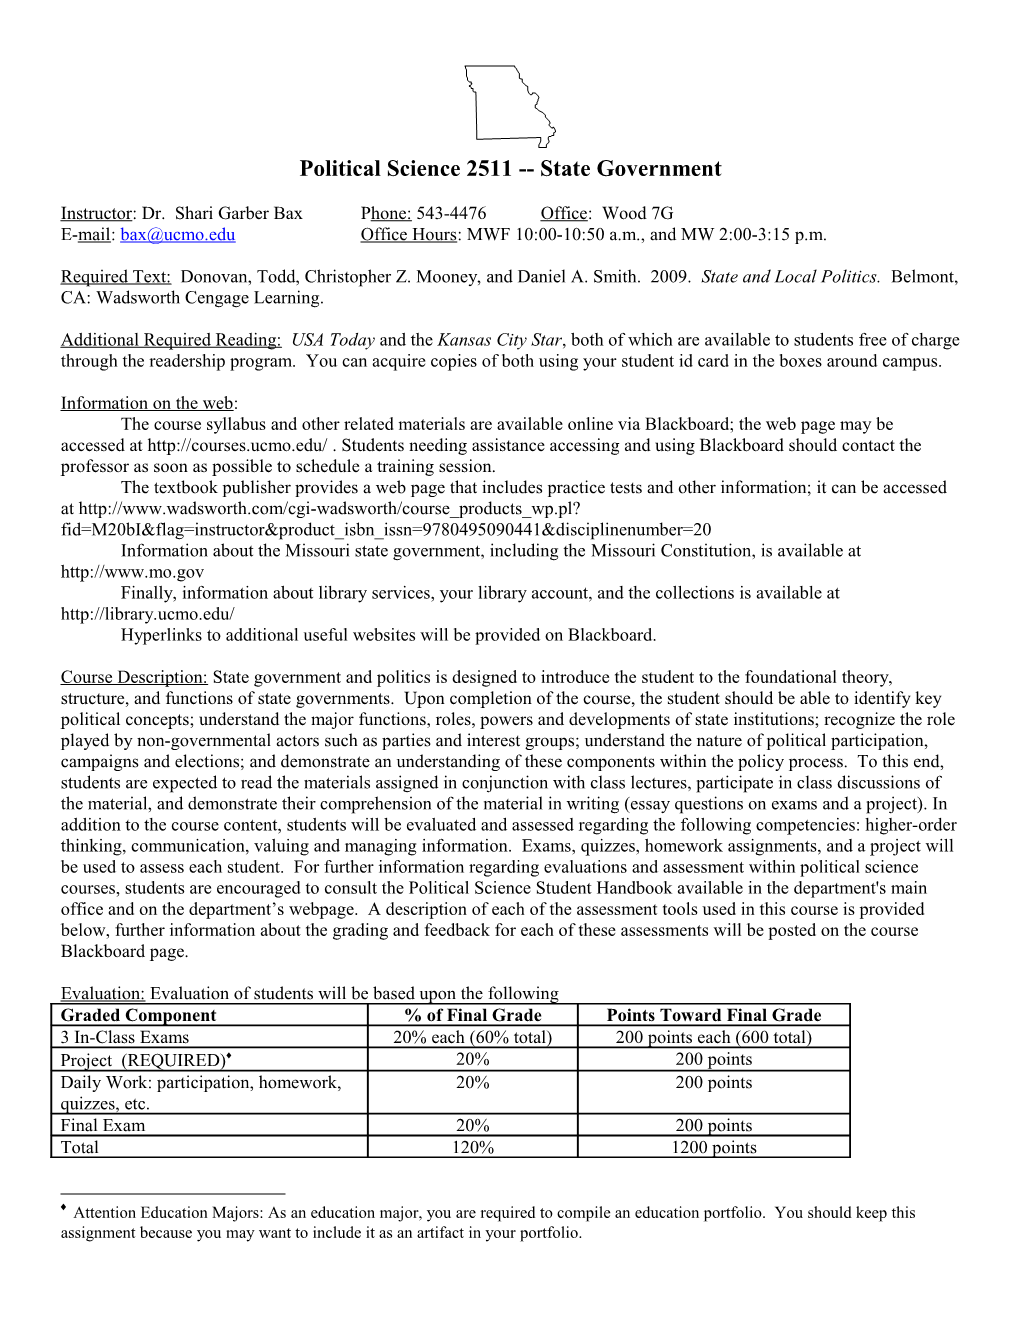 Political Science 2511 State Government